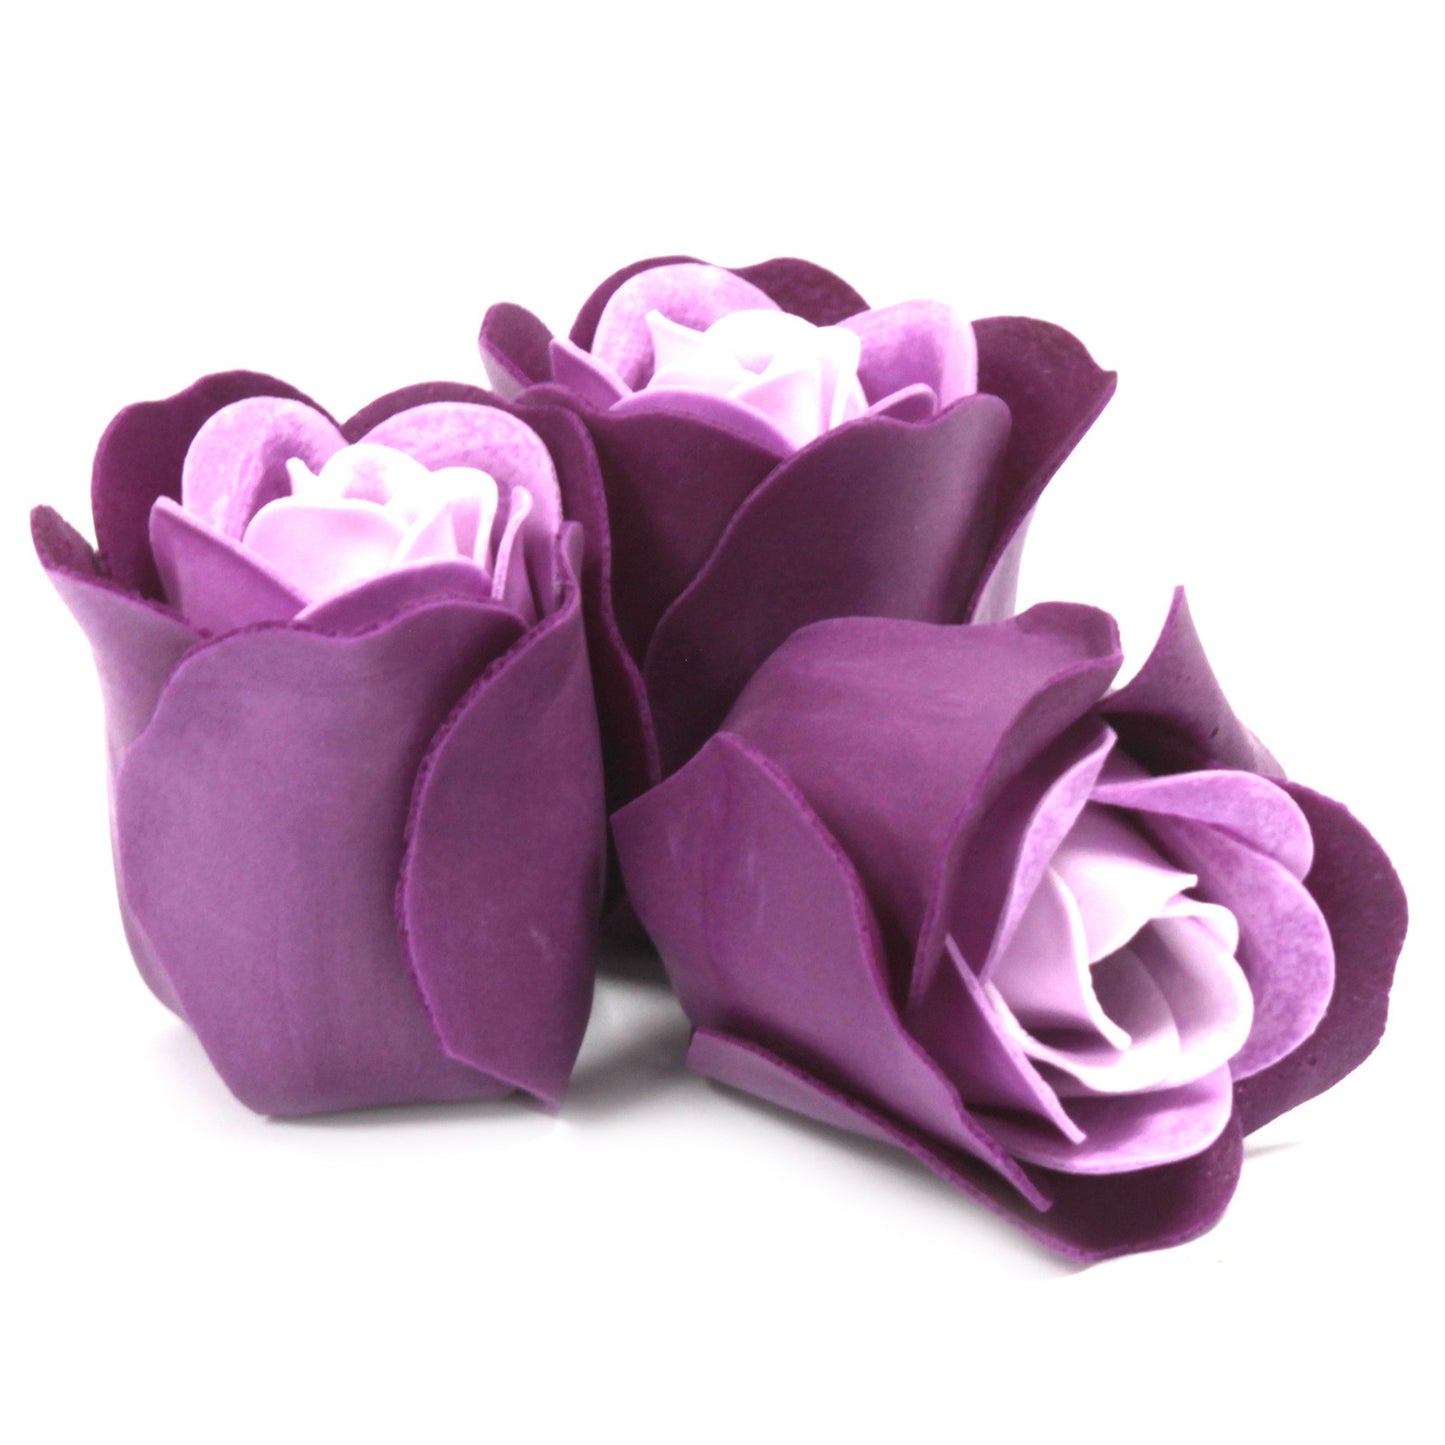 Elegant Heart-Shaped Soap Flower Box Set of 3 - Perfect for Romantic Baths and Guest Soaps